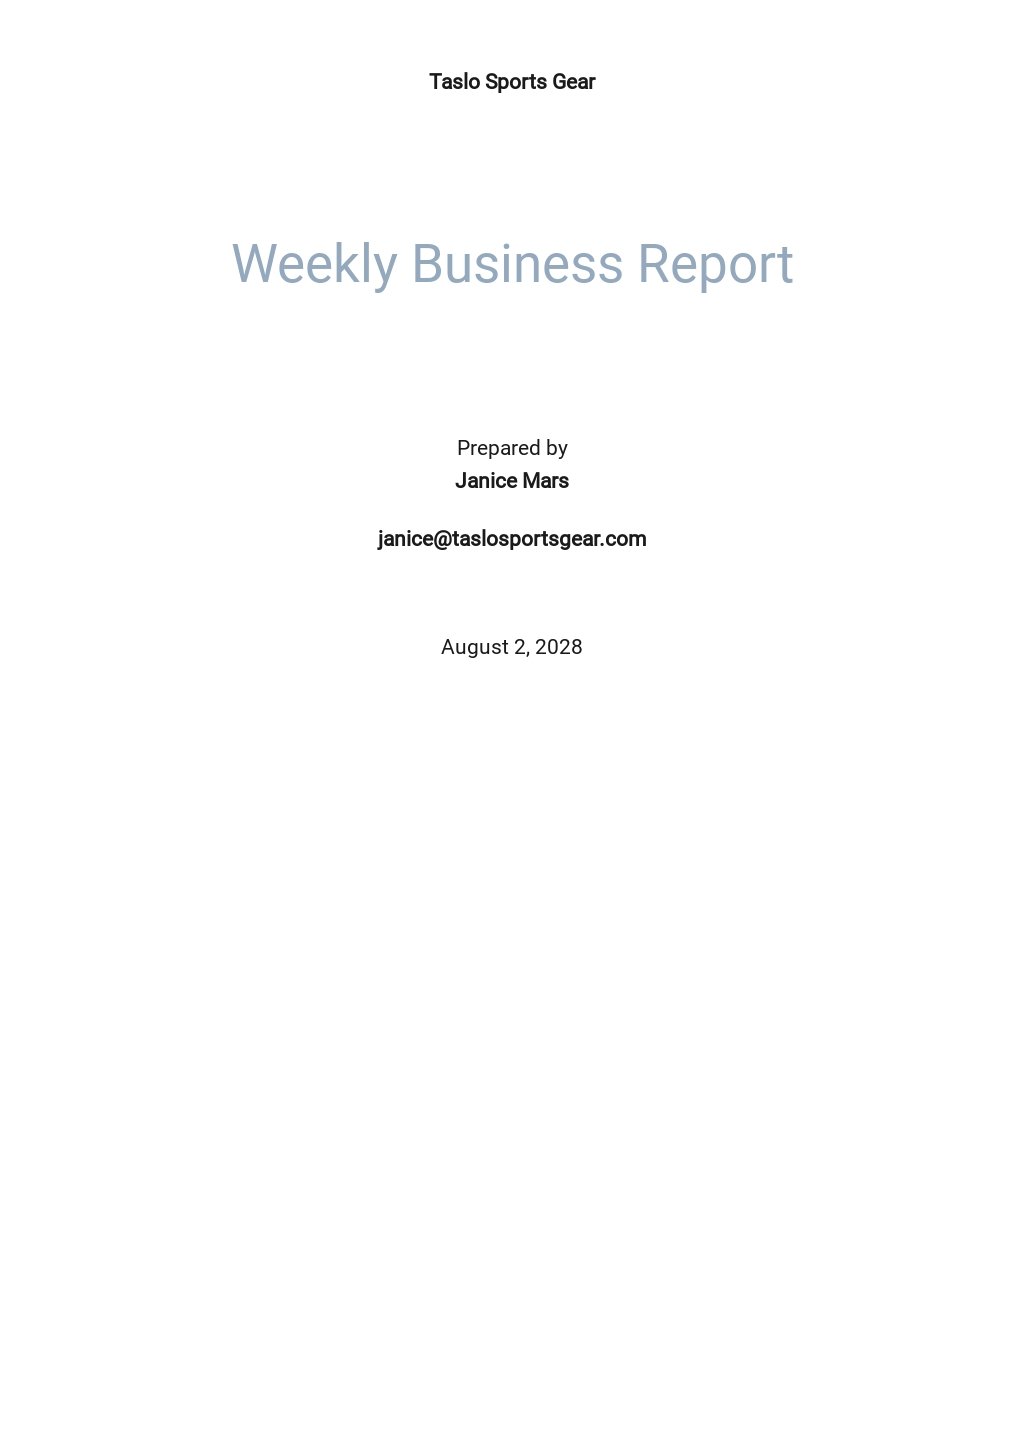 Weekly Business Report Template.jpe